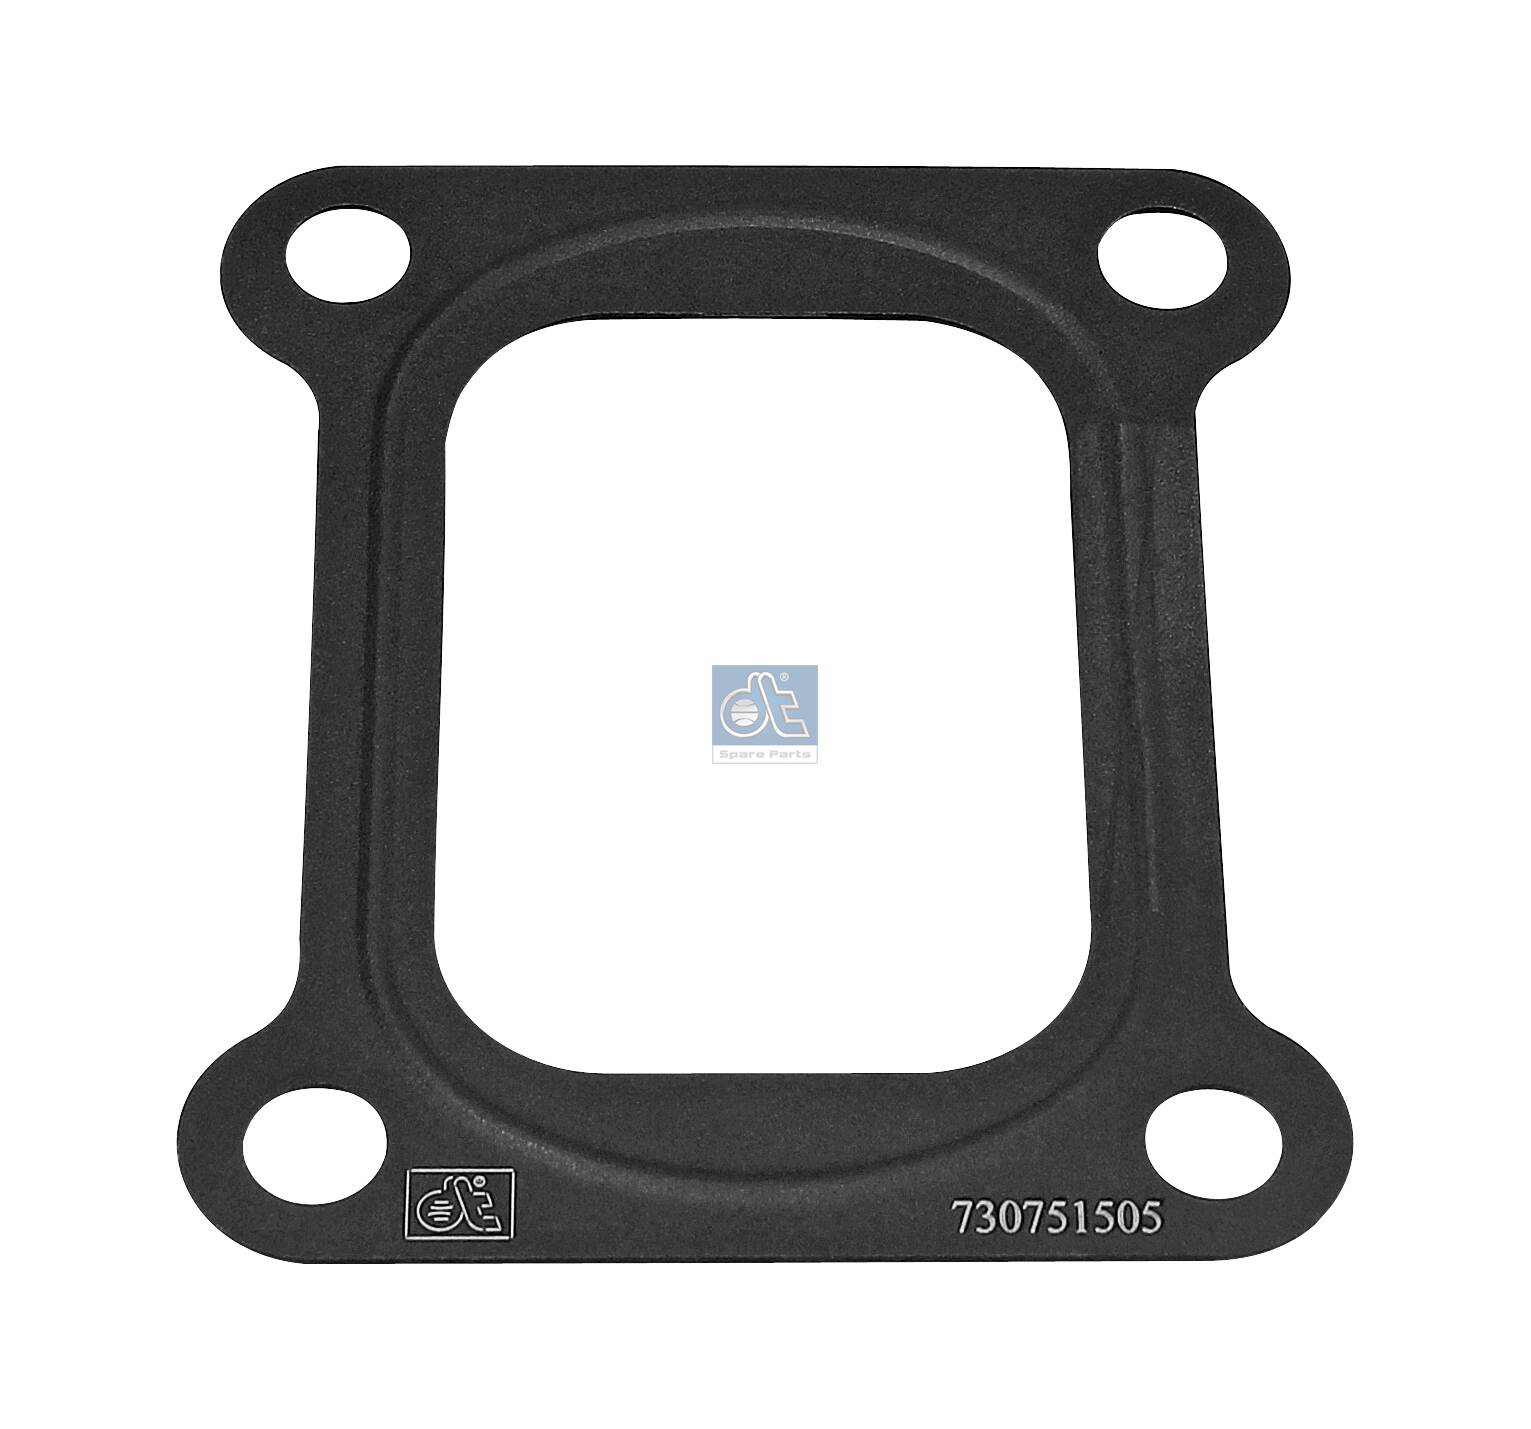 2.14205, Gasket, charger, DT Spare Parts, 7408194365, 8194365, 422779, 7420781146, 20781146, 1545141, 00903300, 03.14.026, 034283, 21841, 409.330, 46772, 702639920, 704245800, 82119, EPL1146, 0314026, 034.283, 21841.00, 69905DPH, 70-26399-20, 755443, EPL-1146, 2184100, 409330, 70-42458-00, EPL365, 1451904, 755.443, EPL779